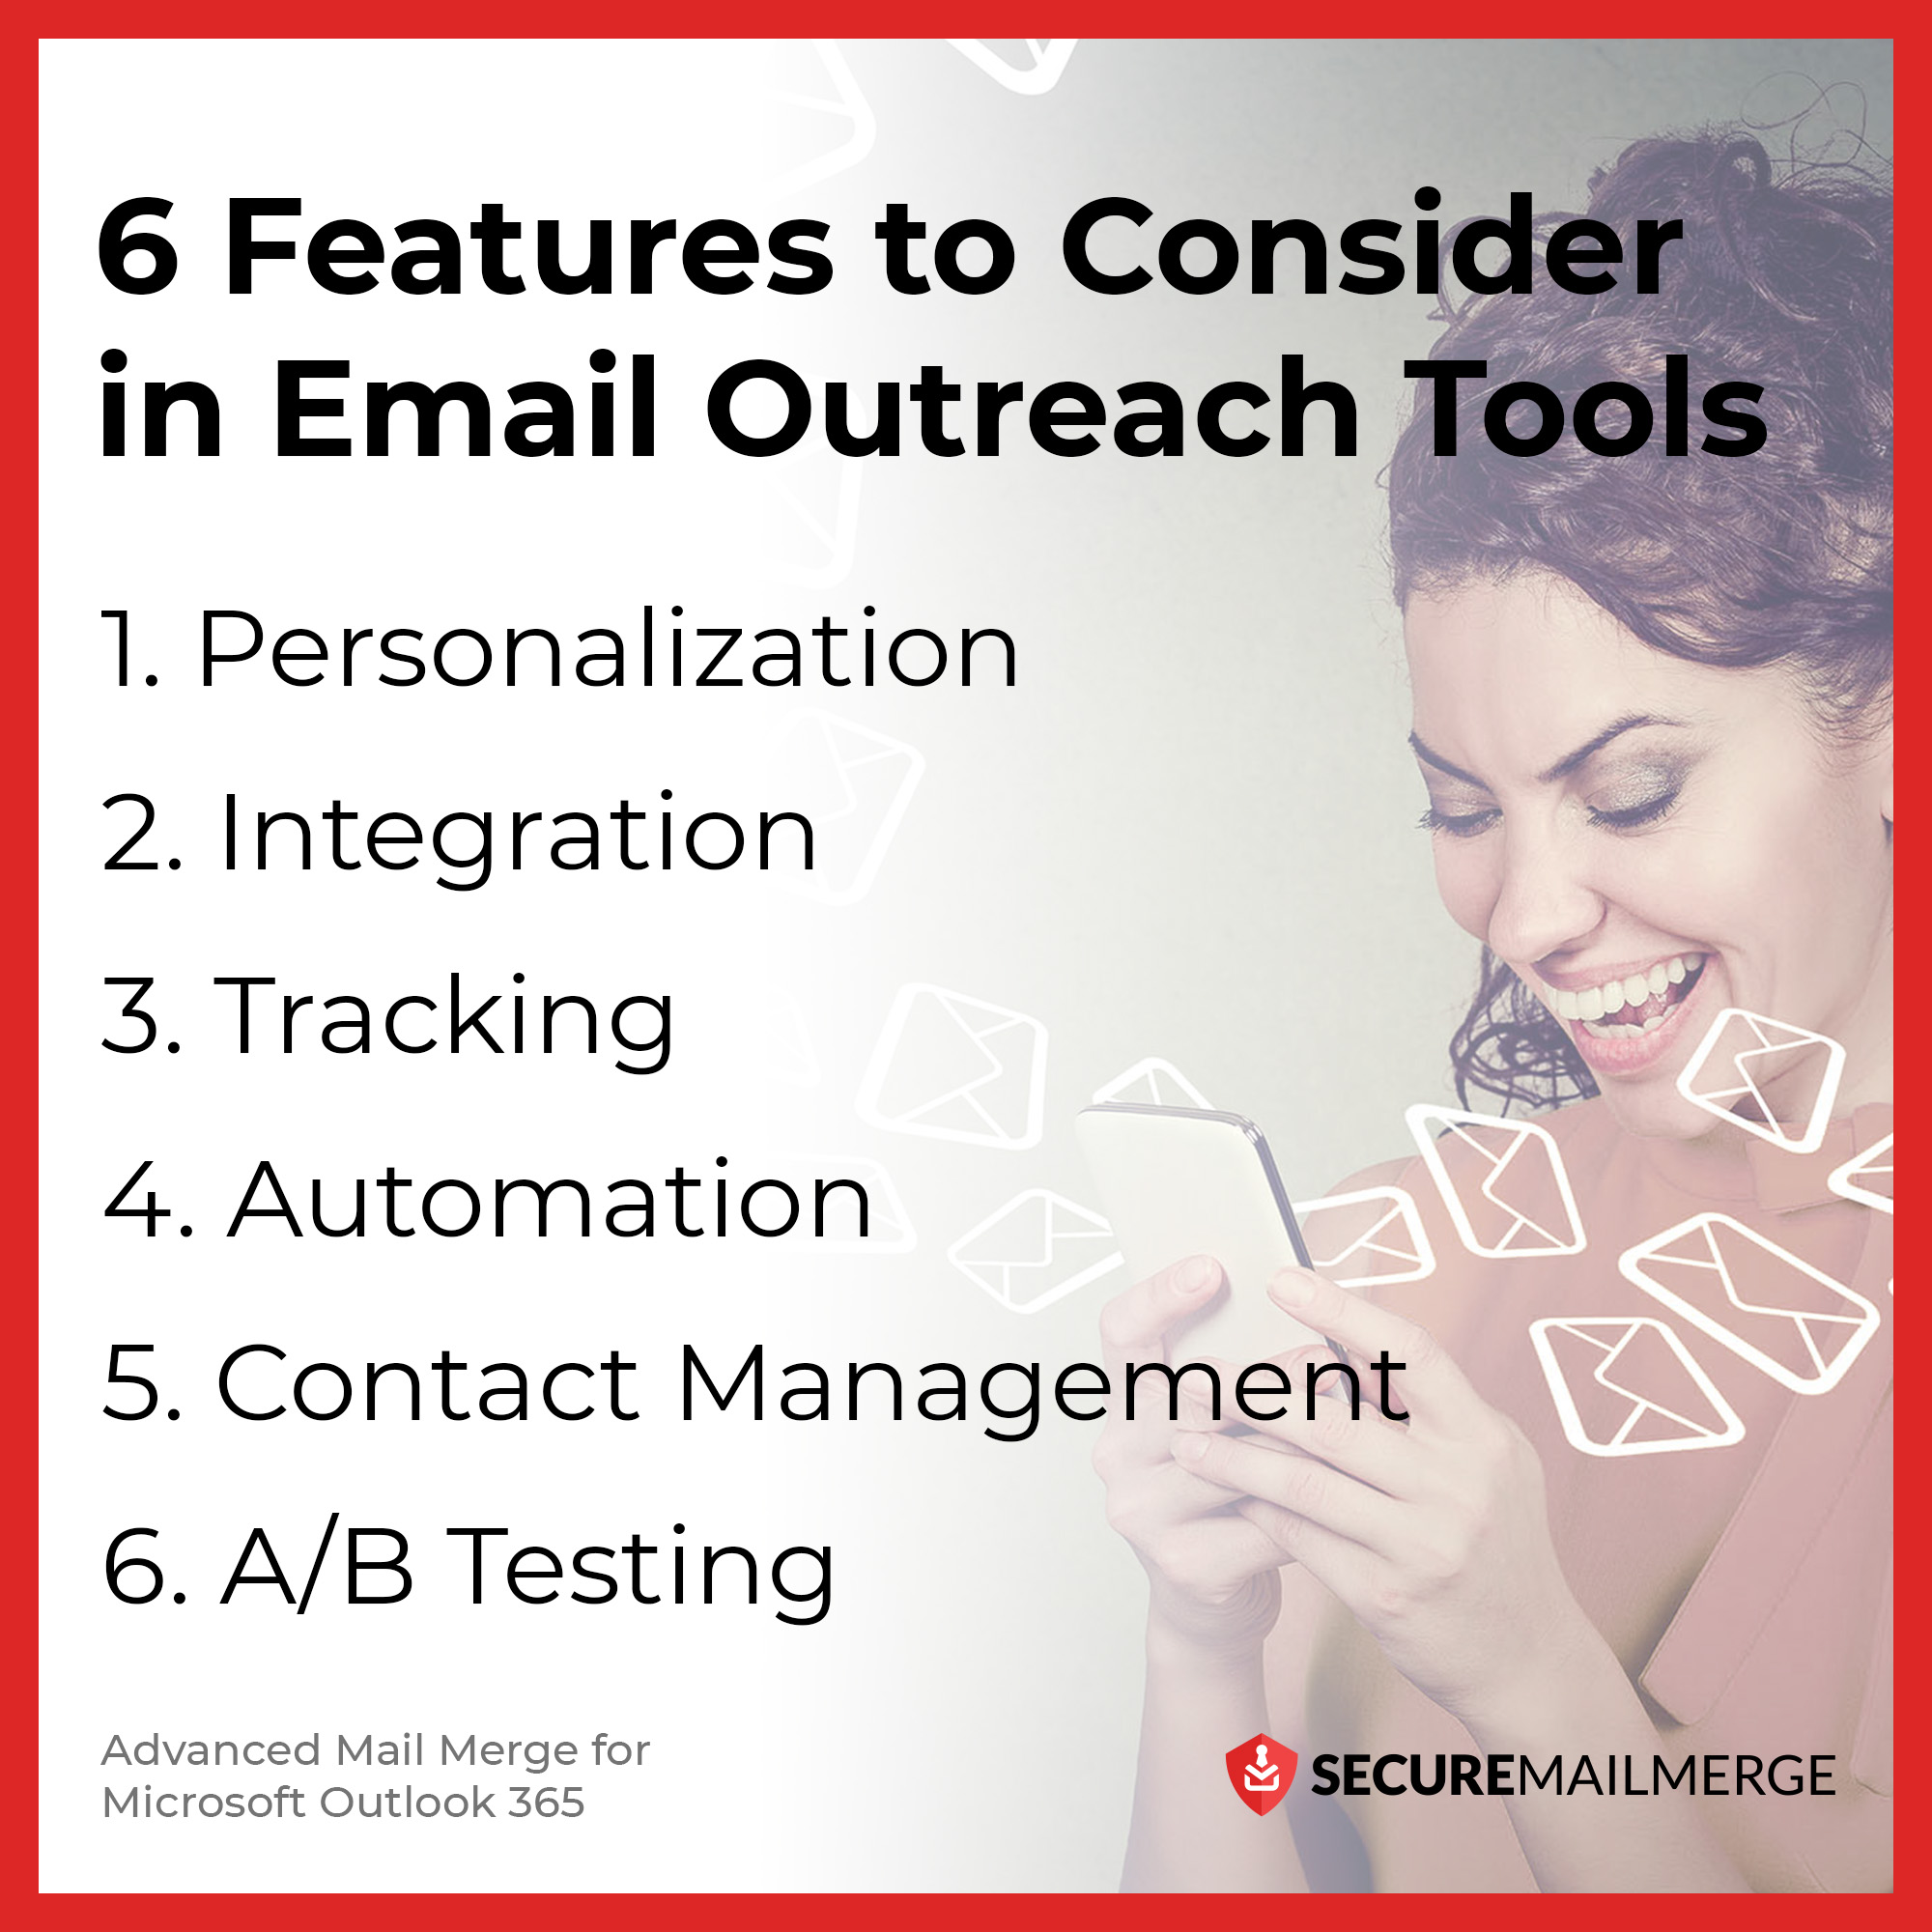 6 Features to Consider in Email Outreach Tools